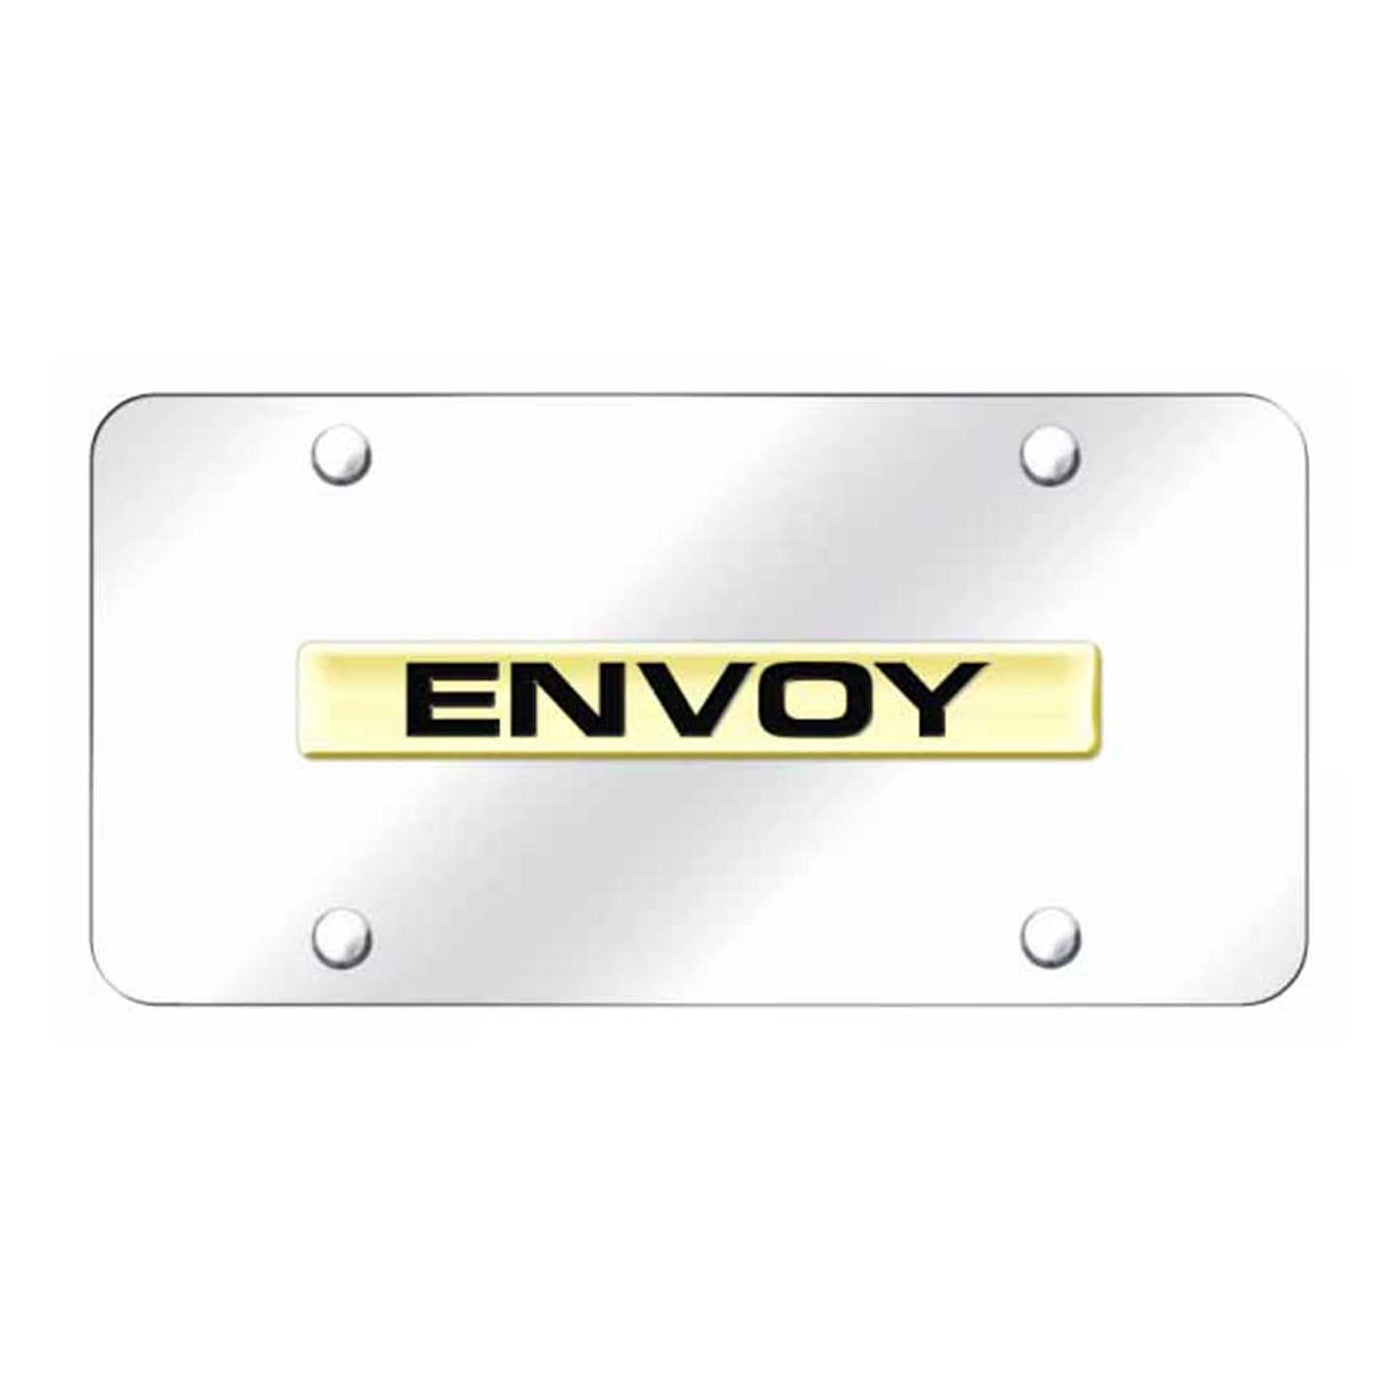 Envoy Name License Plate - Gold on Mirrored